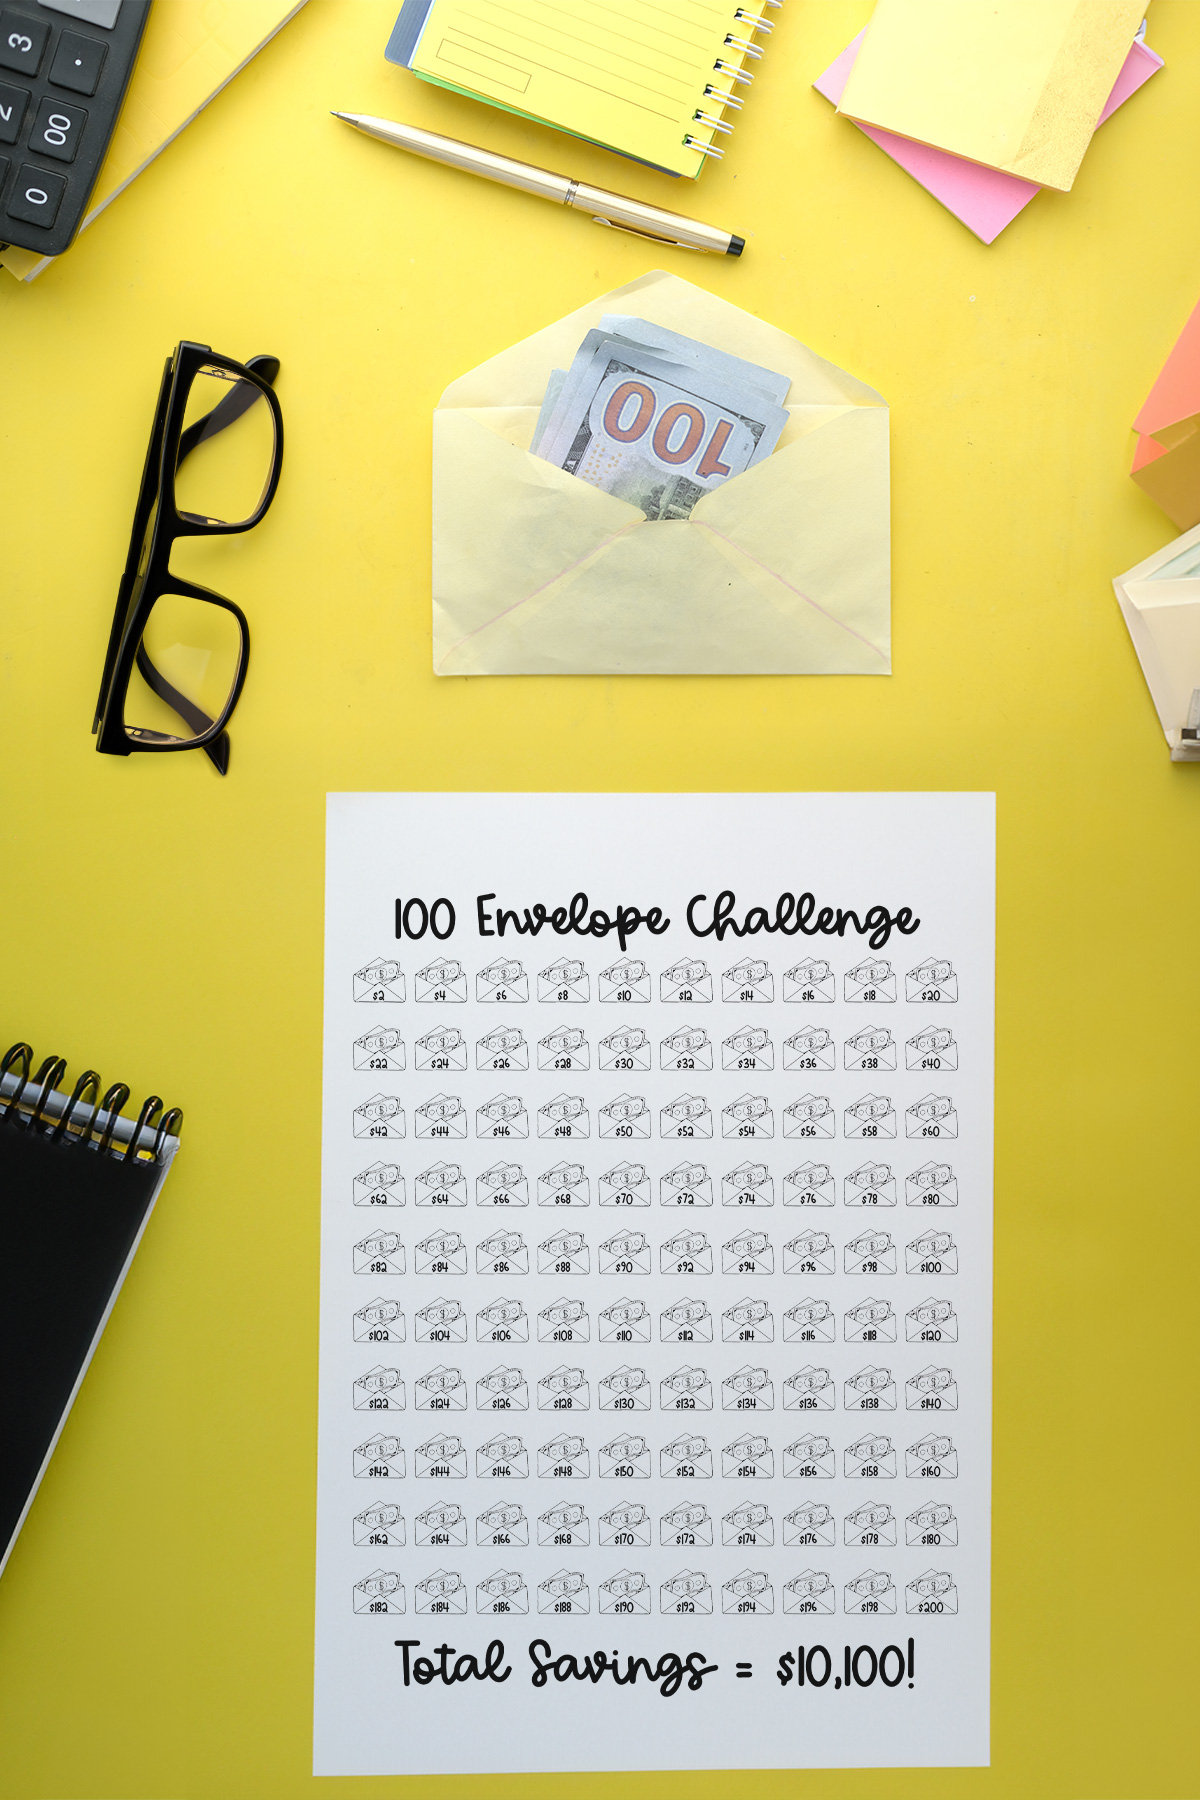 This image is showing an example of a free 100 envelope challenge chart printable you can get at the end of this post.